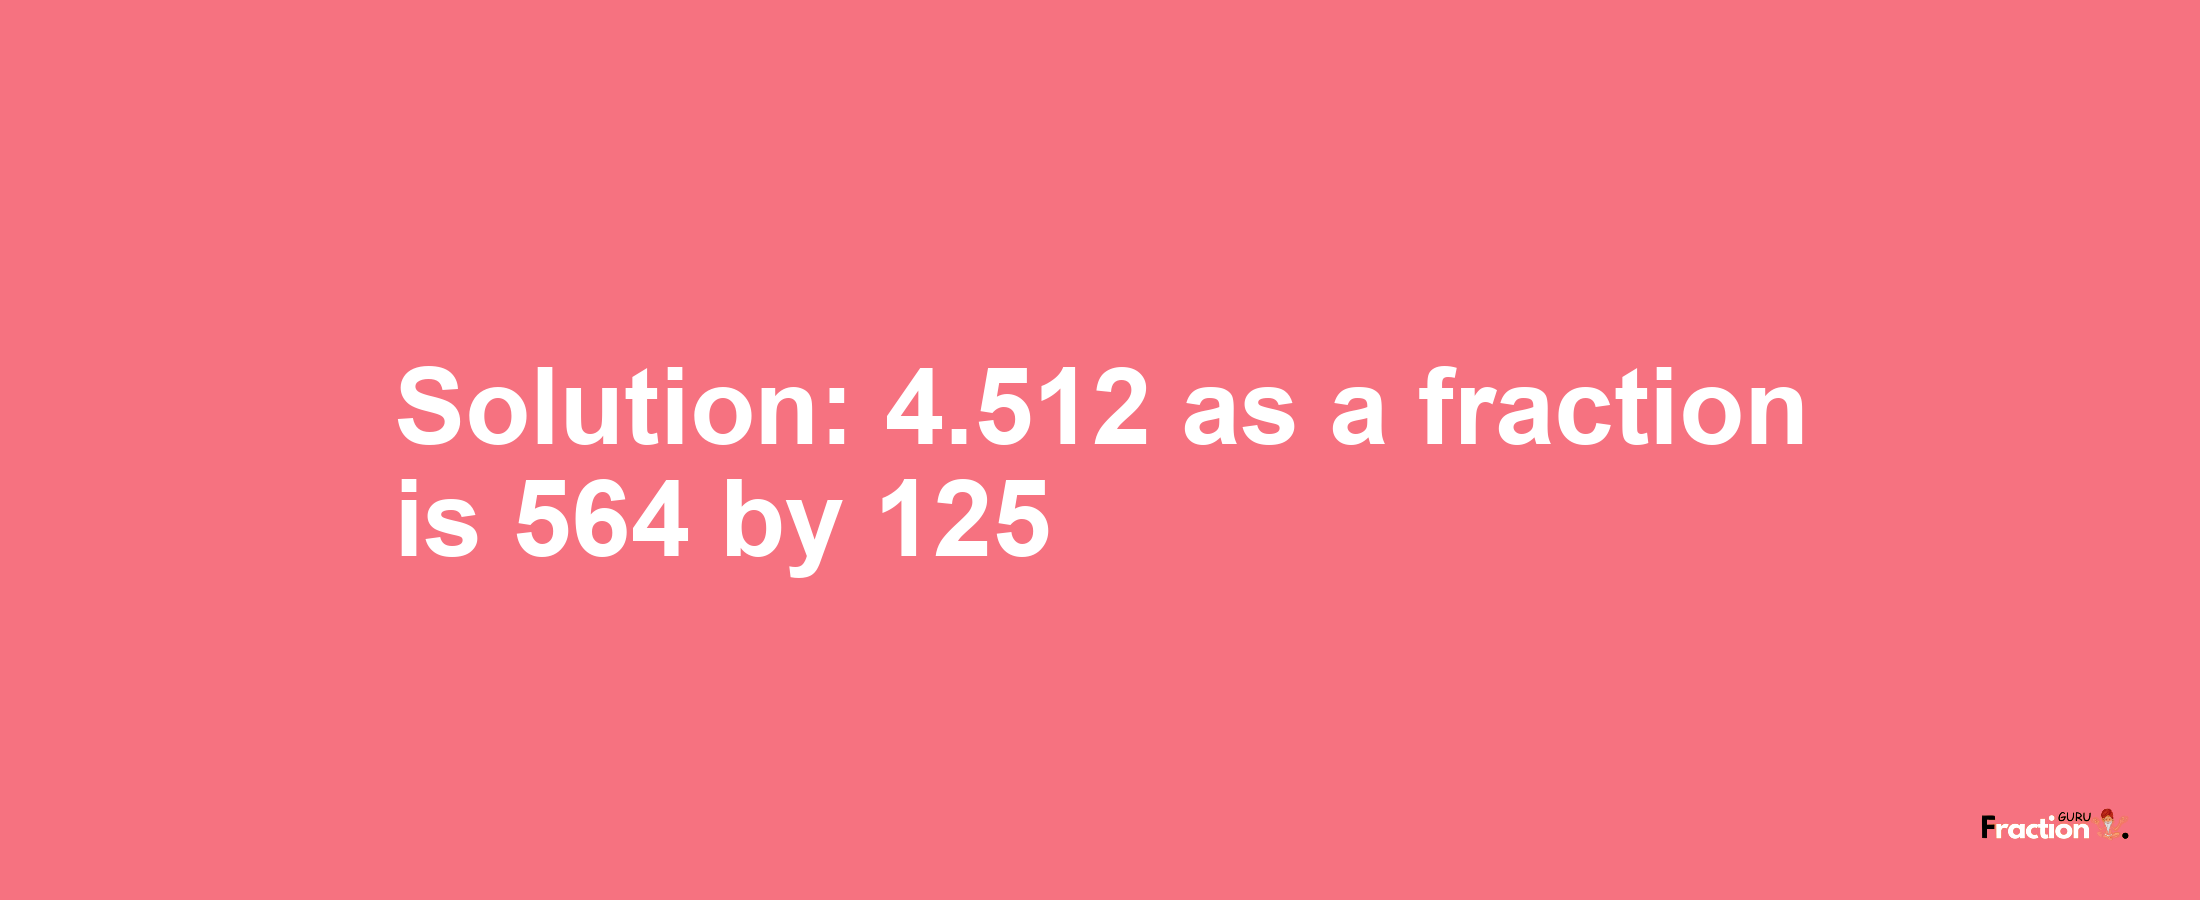 Solution:4.512 as a fraction is 564/125